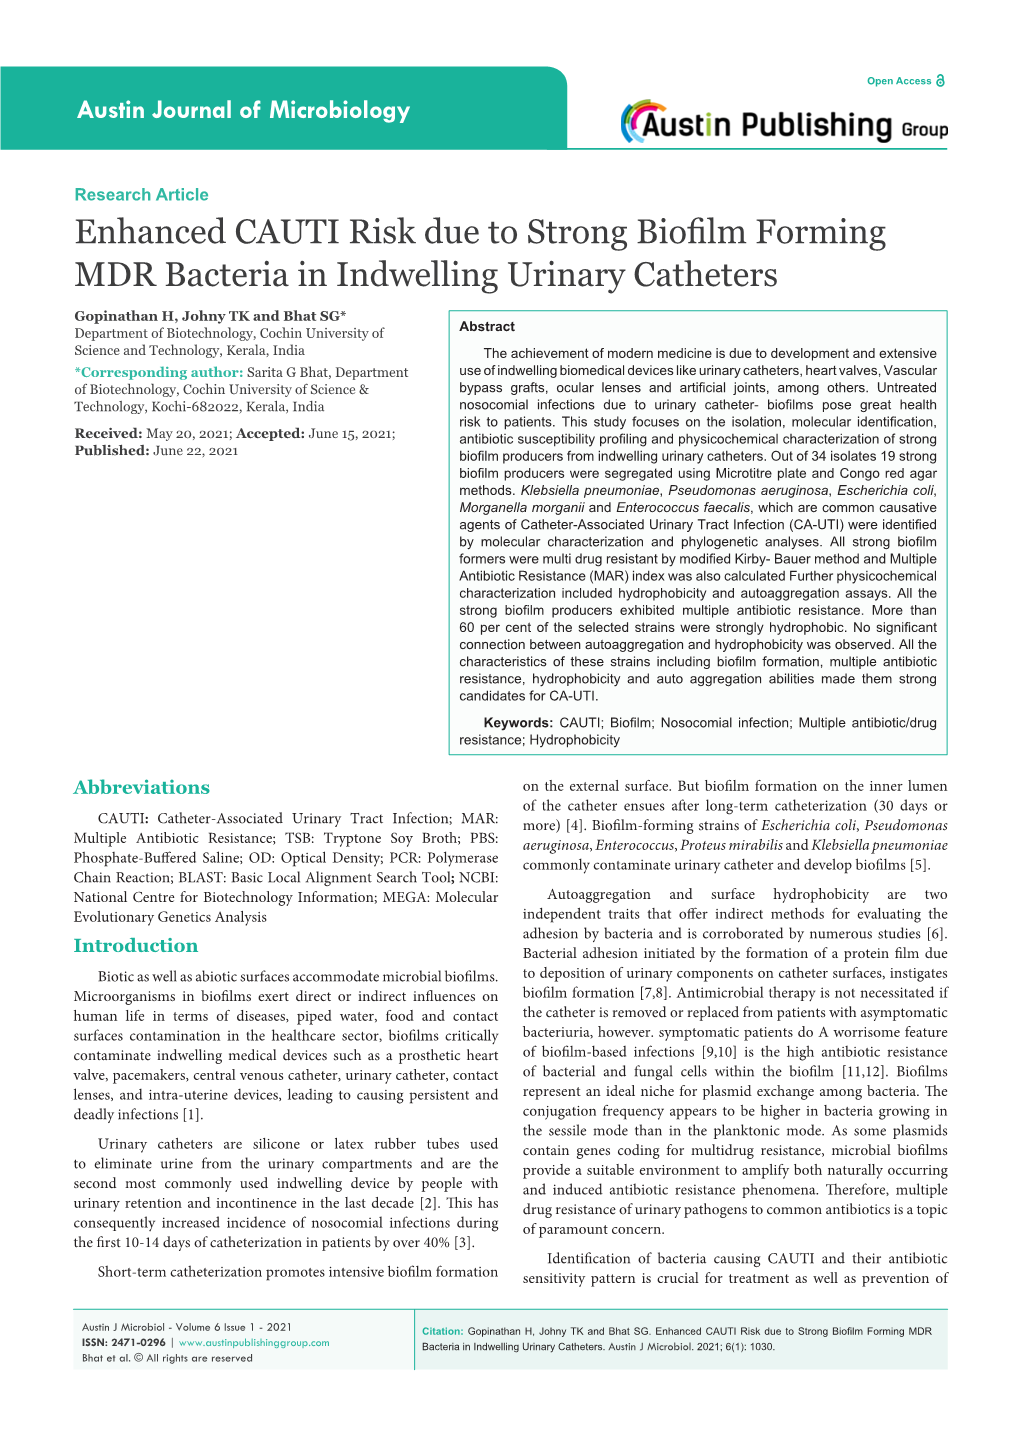 Enhanced CAUTI Risk Due to Strong Biofilm Forming MDR Bacteria in Indwelling Urinary Catheters